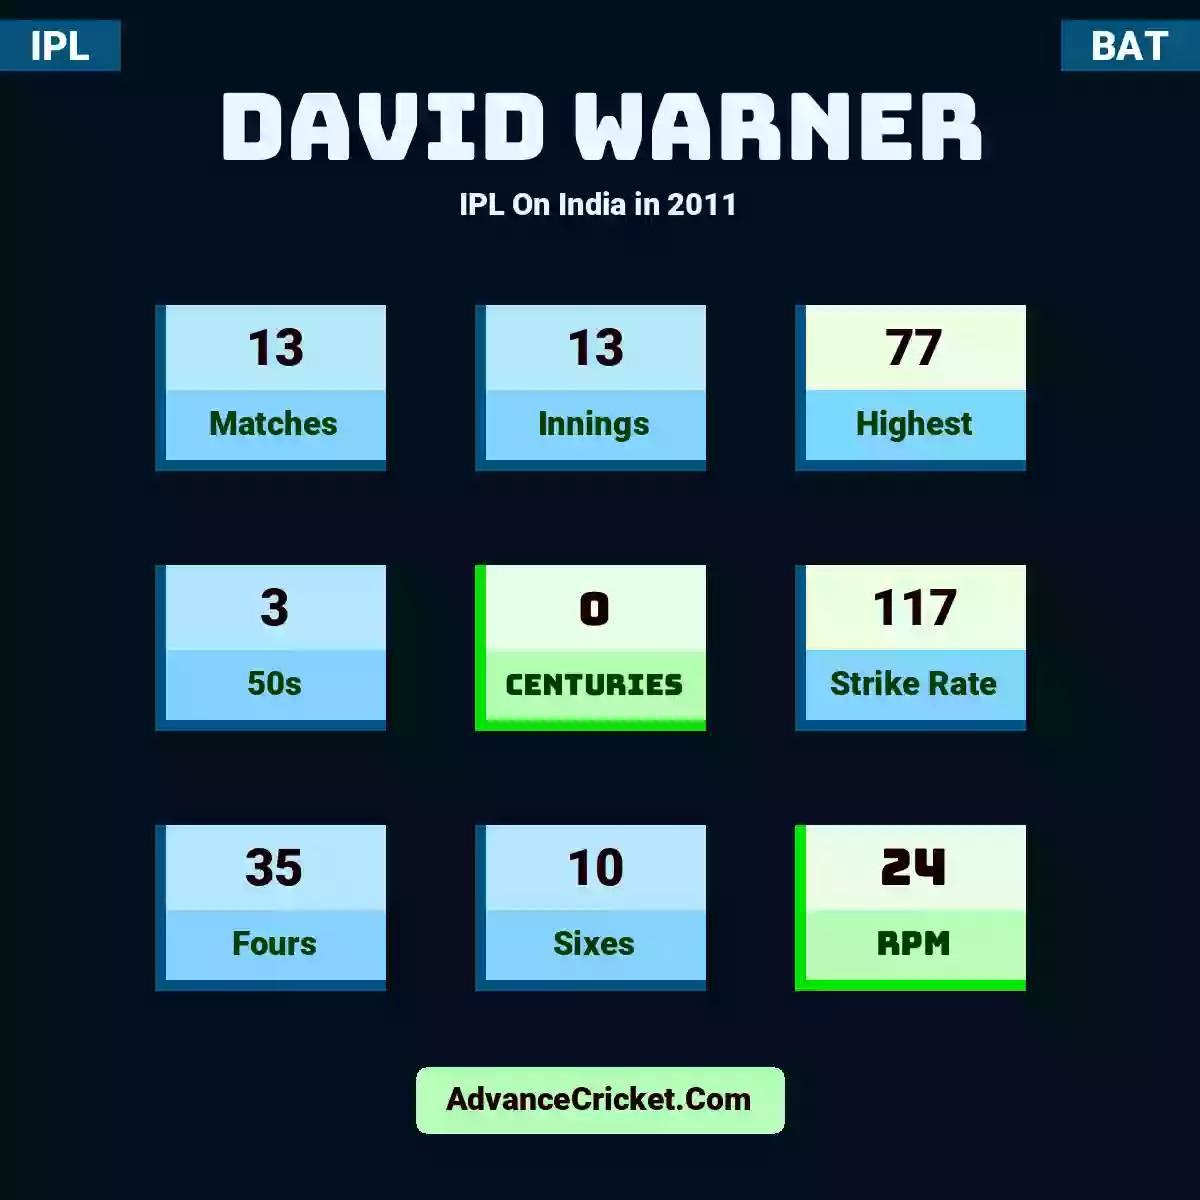 David Warner IPL  On India in 2011, David Warner played 13 matches, scored 77 runs as highest, 3 half-centuries, and 0 centuries, with a strike rate of 117. D.Warner hit 35 fours and 10 sixes, with an RPM of 24.